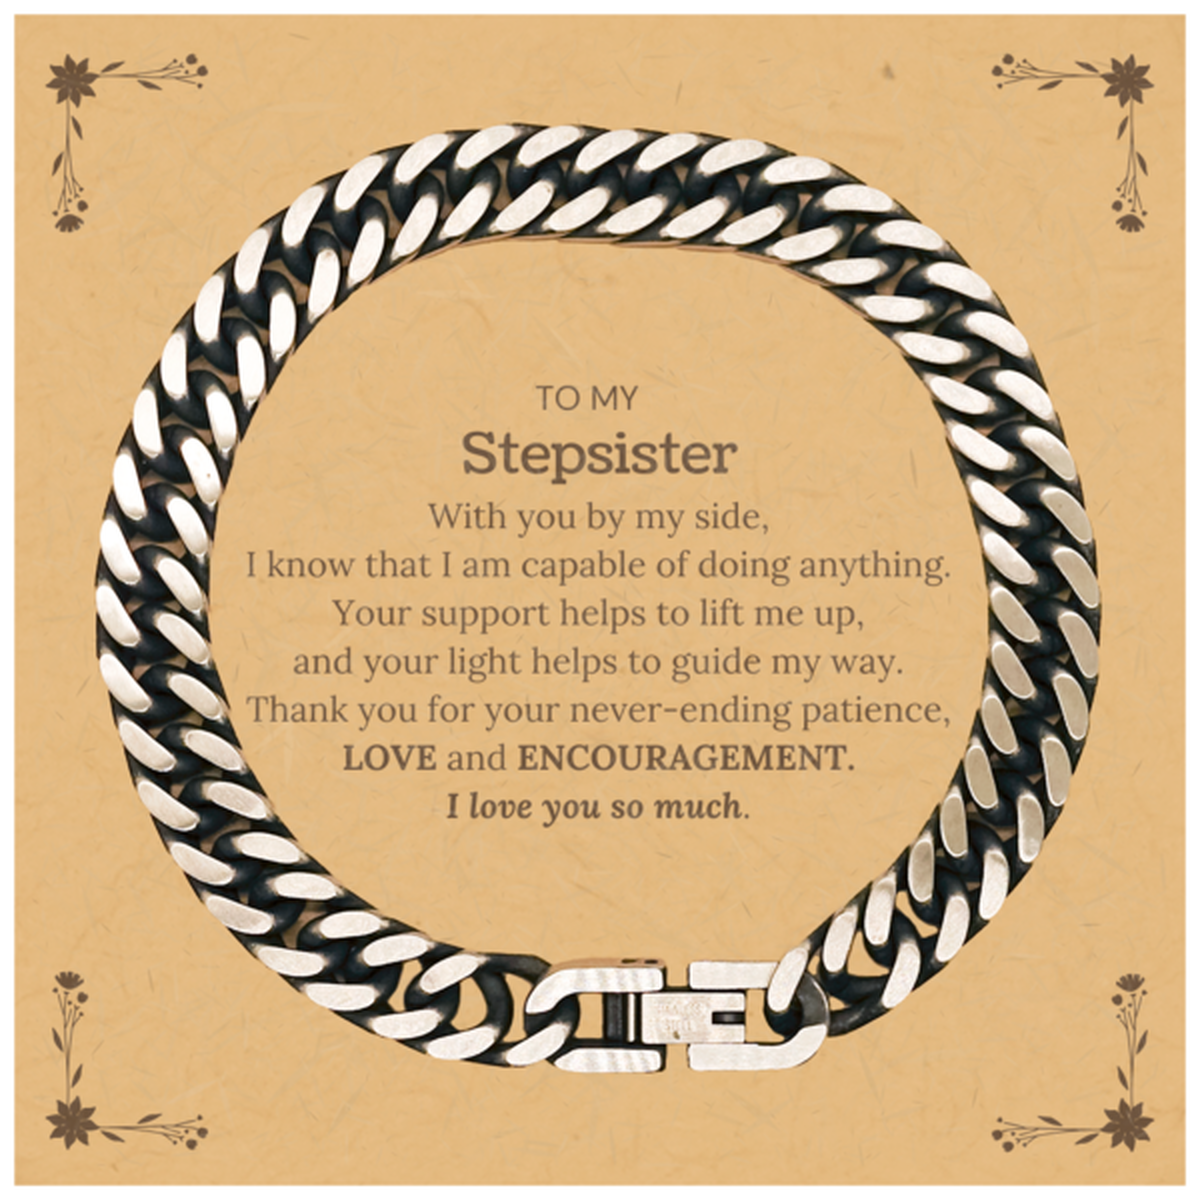 Appreciation Stepsister Cuban Link Chain Bracelet Gifts, To My Stepsister Birthday Christmas Wedding Keepsake Gifts for Stepsister With you by my side, I know that I am capable of doing anything. I love you so much